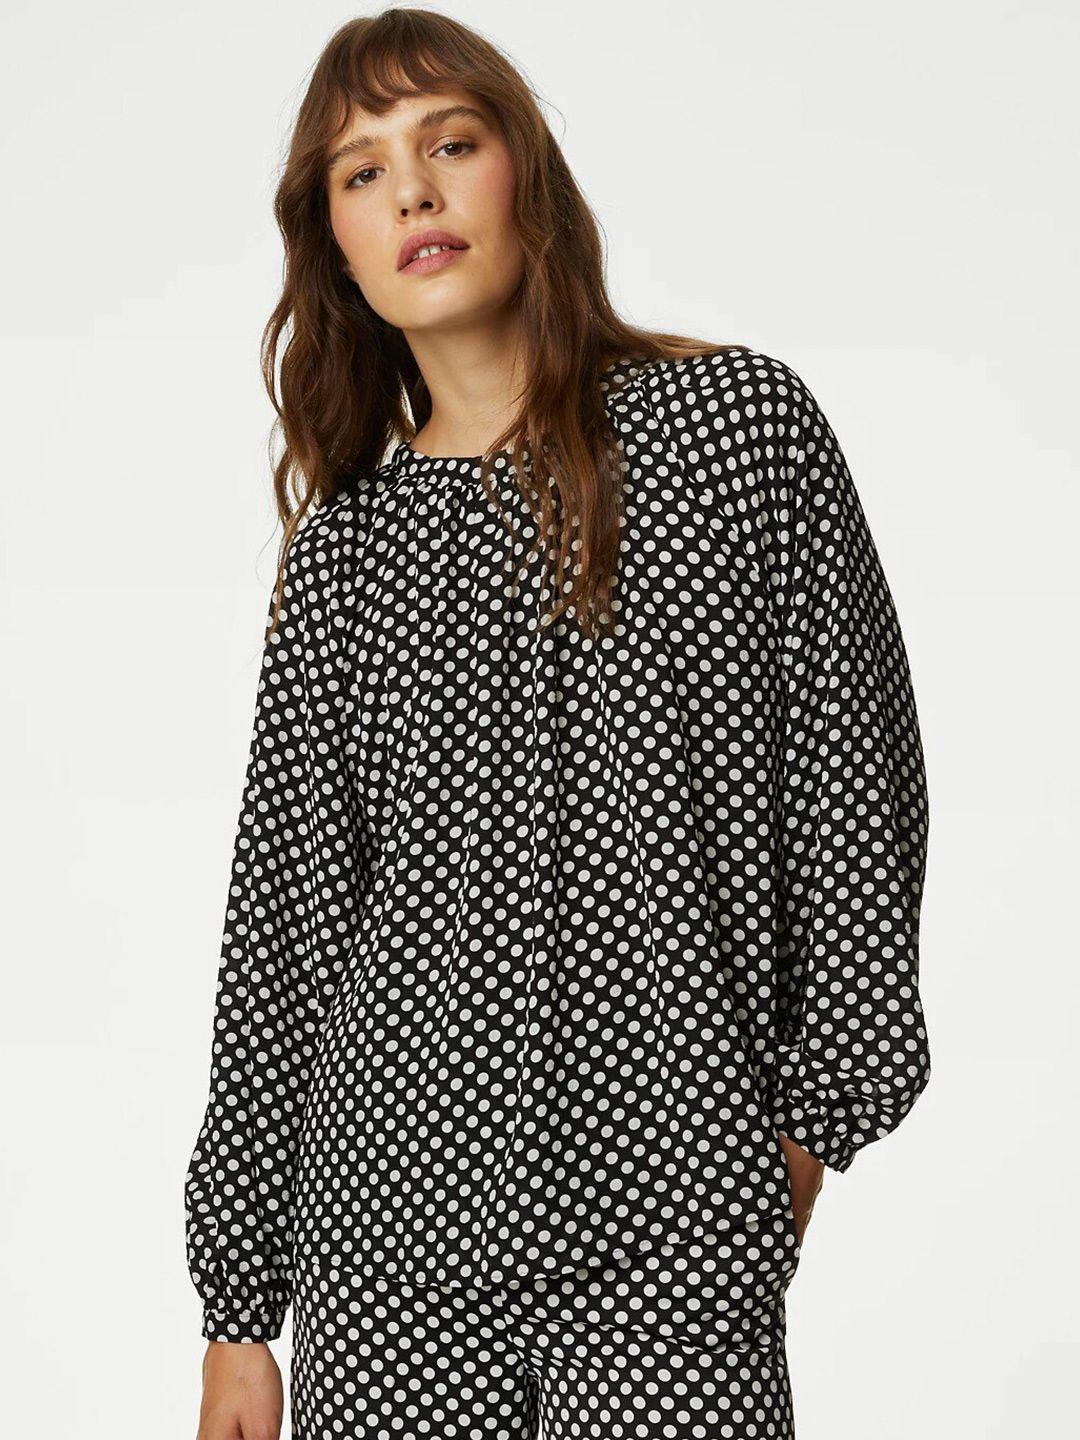 marks & spencer polka dots printed gathered or pleated top